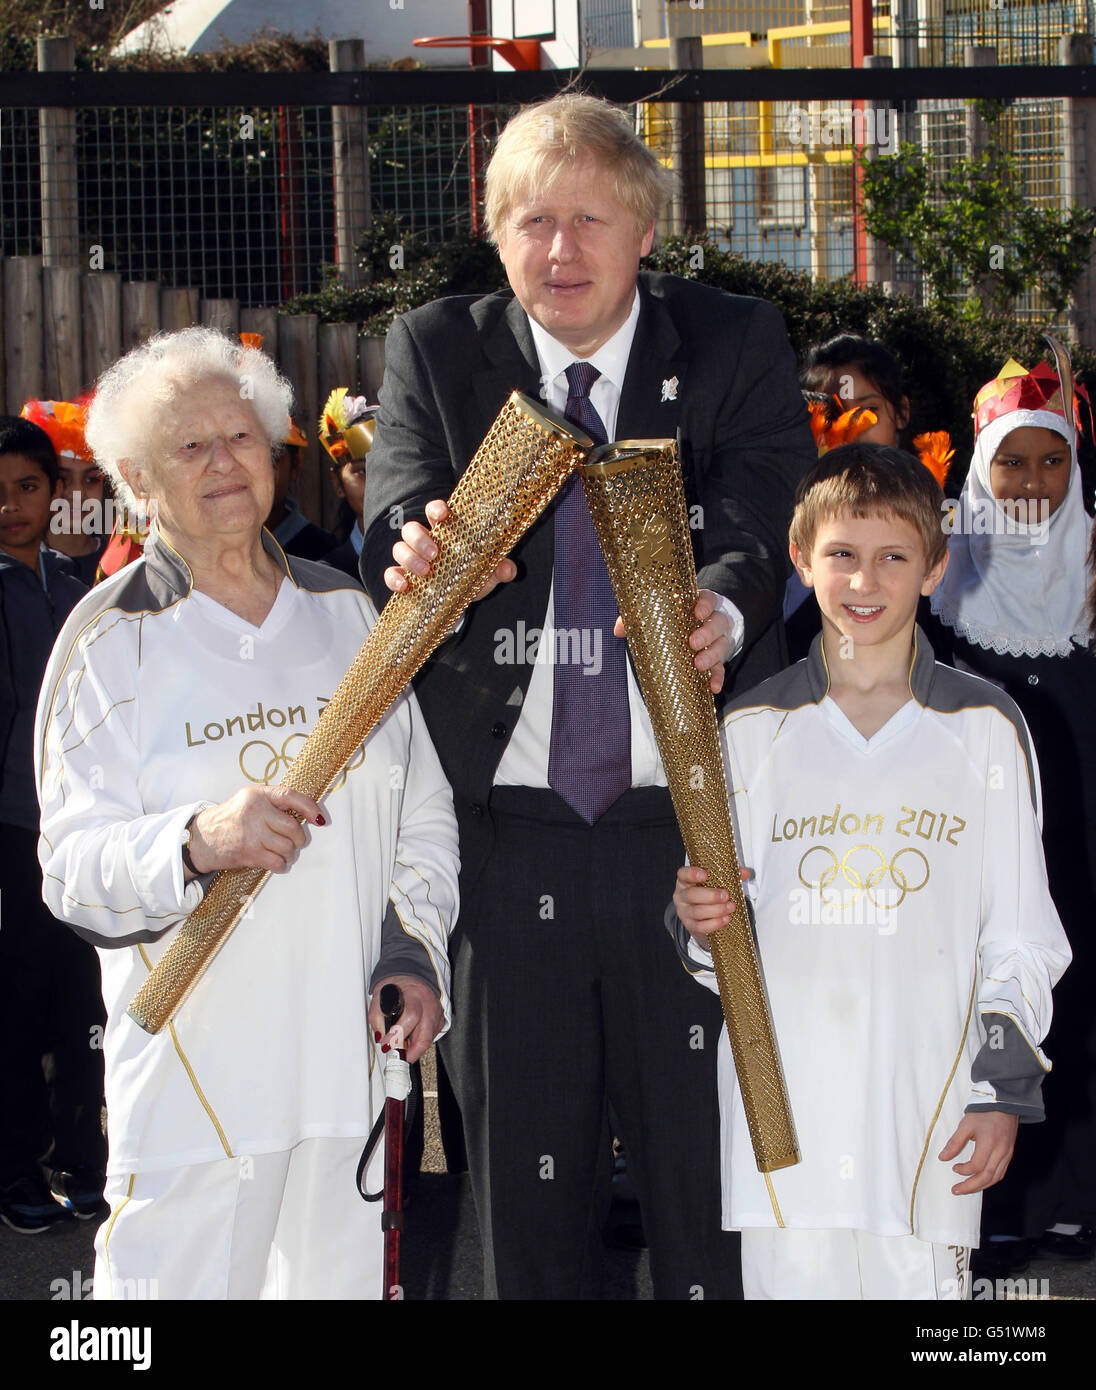 London 2012 Olympic Torchbearer's Dinah Gould aged 99 (left) and Dominic John MacGowan aged 11 (right) with London Mayor Boris Johnson during a photocall at Redlands Primary School, London. Stock Photo